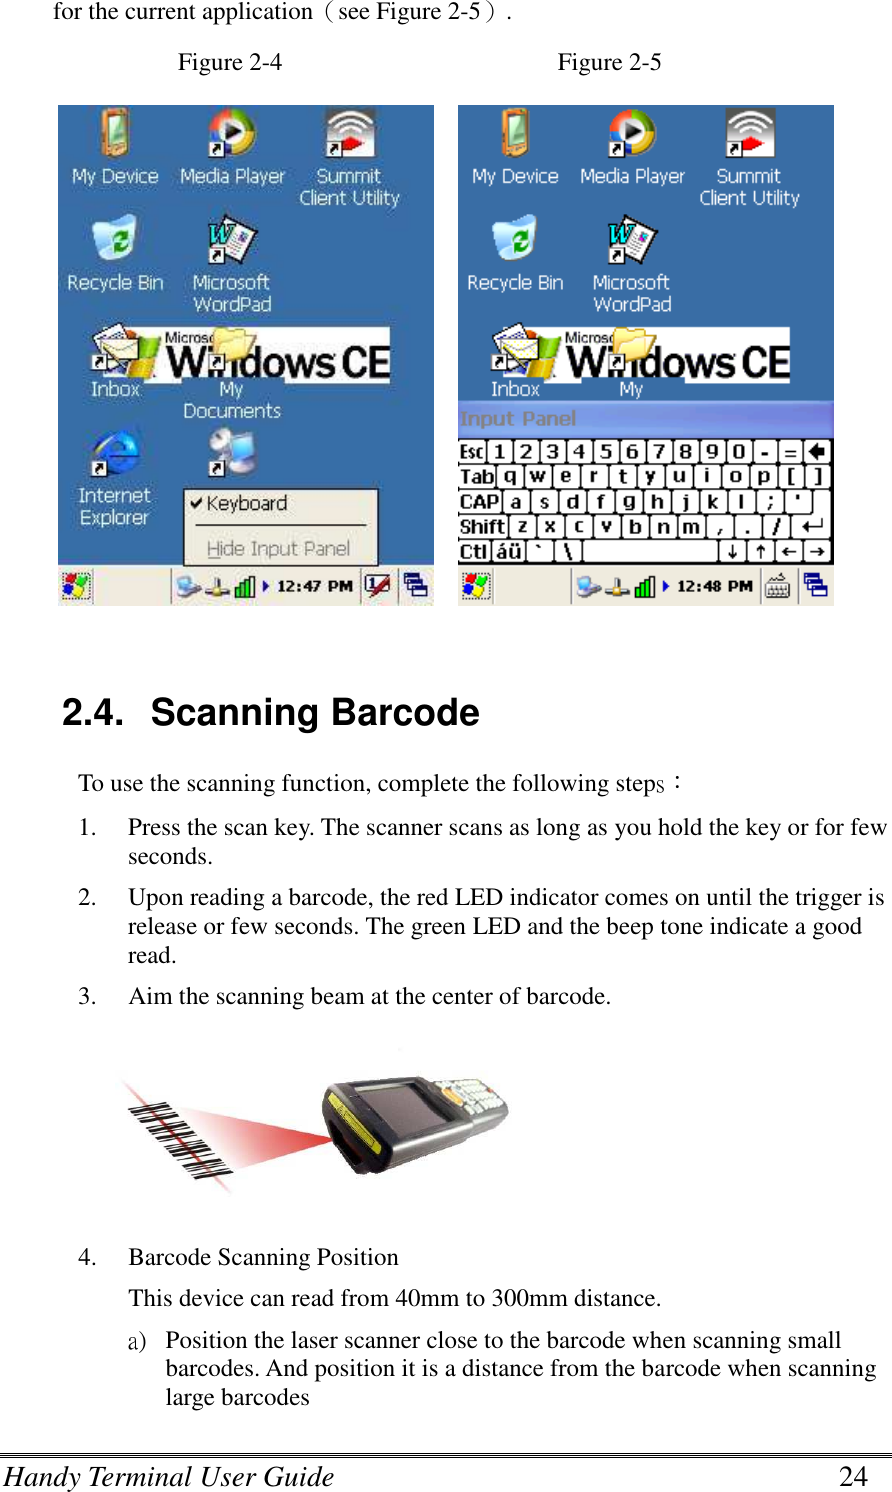 Handy Terminal User Guide      24 for the current application（see Figure 2-5）. Figure 2-4                                            Figure 2-5         2.4.  Scanning Barcode To use the scanning function, complete the following steps： 1. Press the scan key. The scanner scans as long as you hold the key or for few seconds. 2. Upon reading a barcode, the red LED indicator comes on until the trigger is release or few seconds. The green LED and the beep tone indicate a good read. 3. Aim the scanning beam at the center of barcode.  4. Barcode Scanning Position This device can read from 40mm to 300mm distance. a) Position the laser scanner close to the barcode when scanning small barcodes. And position it is a distance from the barcode when scanning large barcodes 